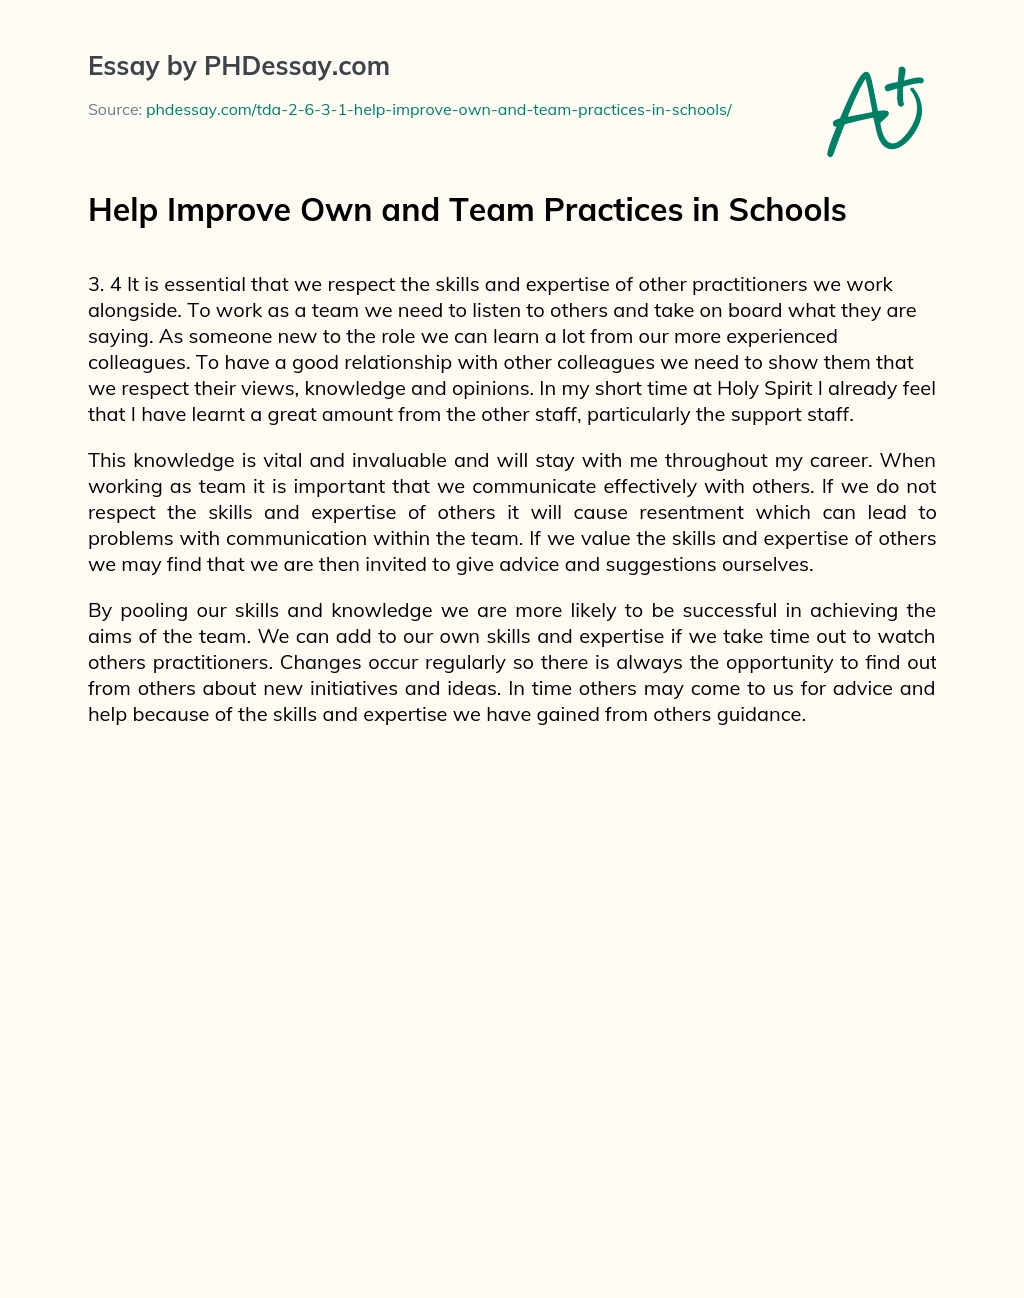 Help Improve Own and Team Practices in Schools essay